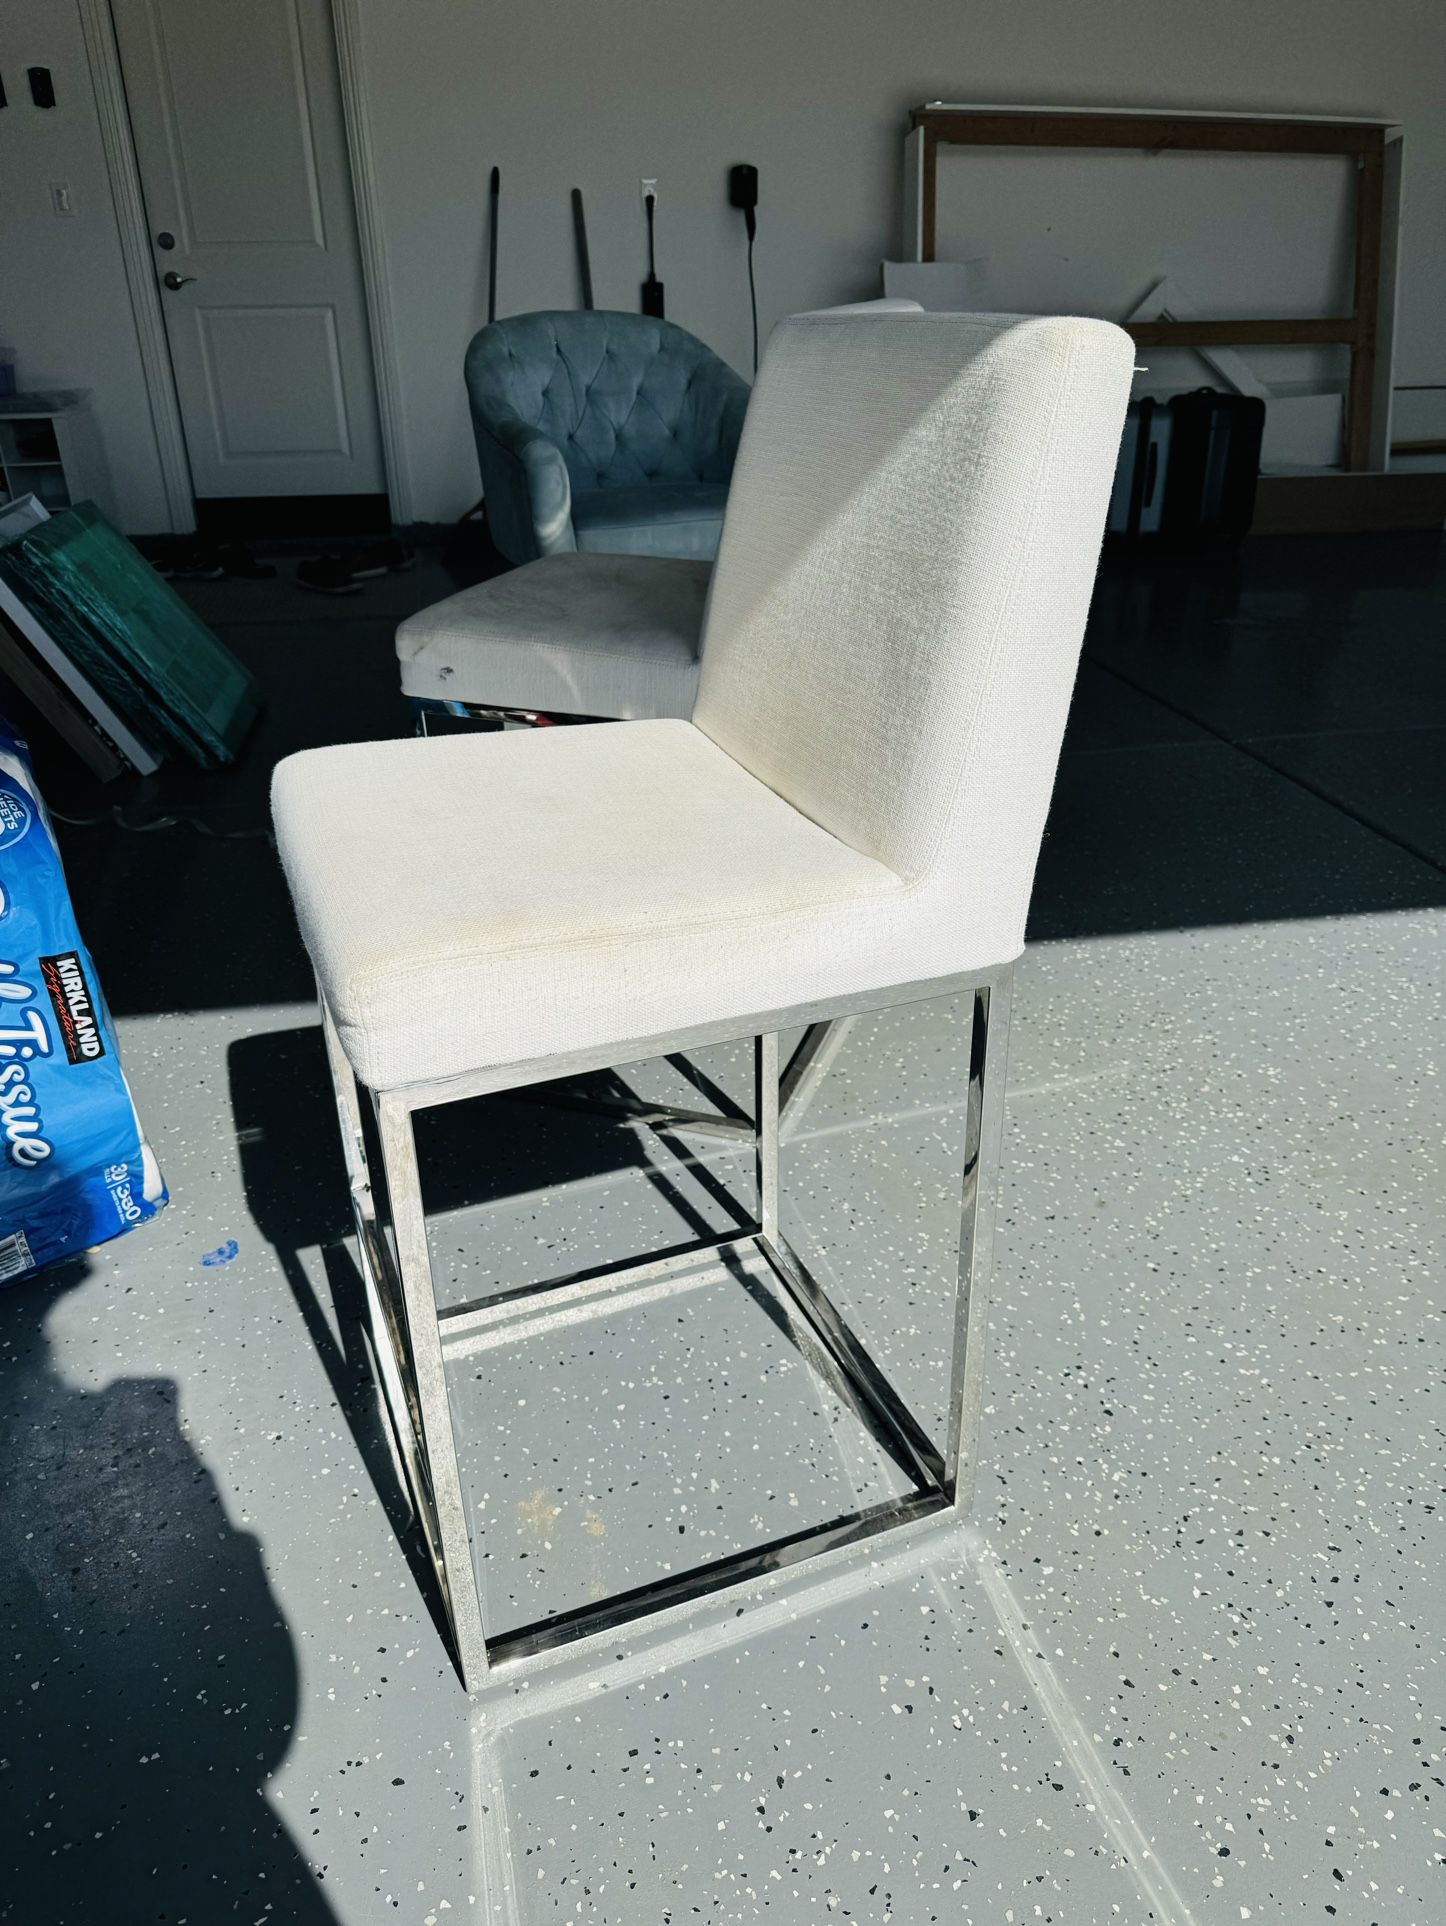 Two Upholstered Bar Chairs White